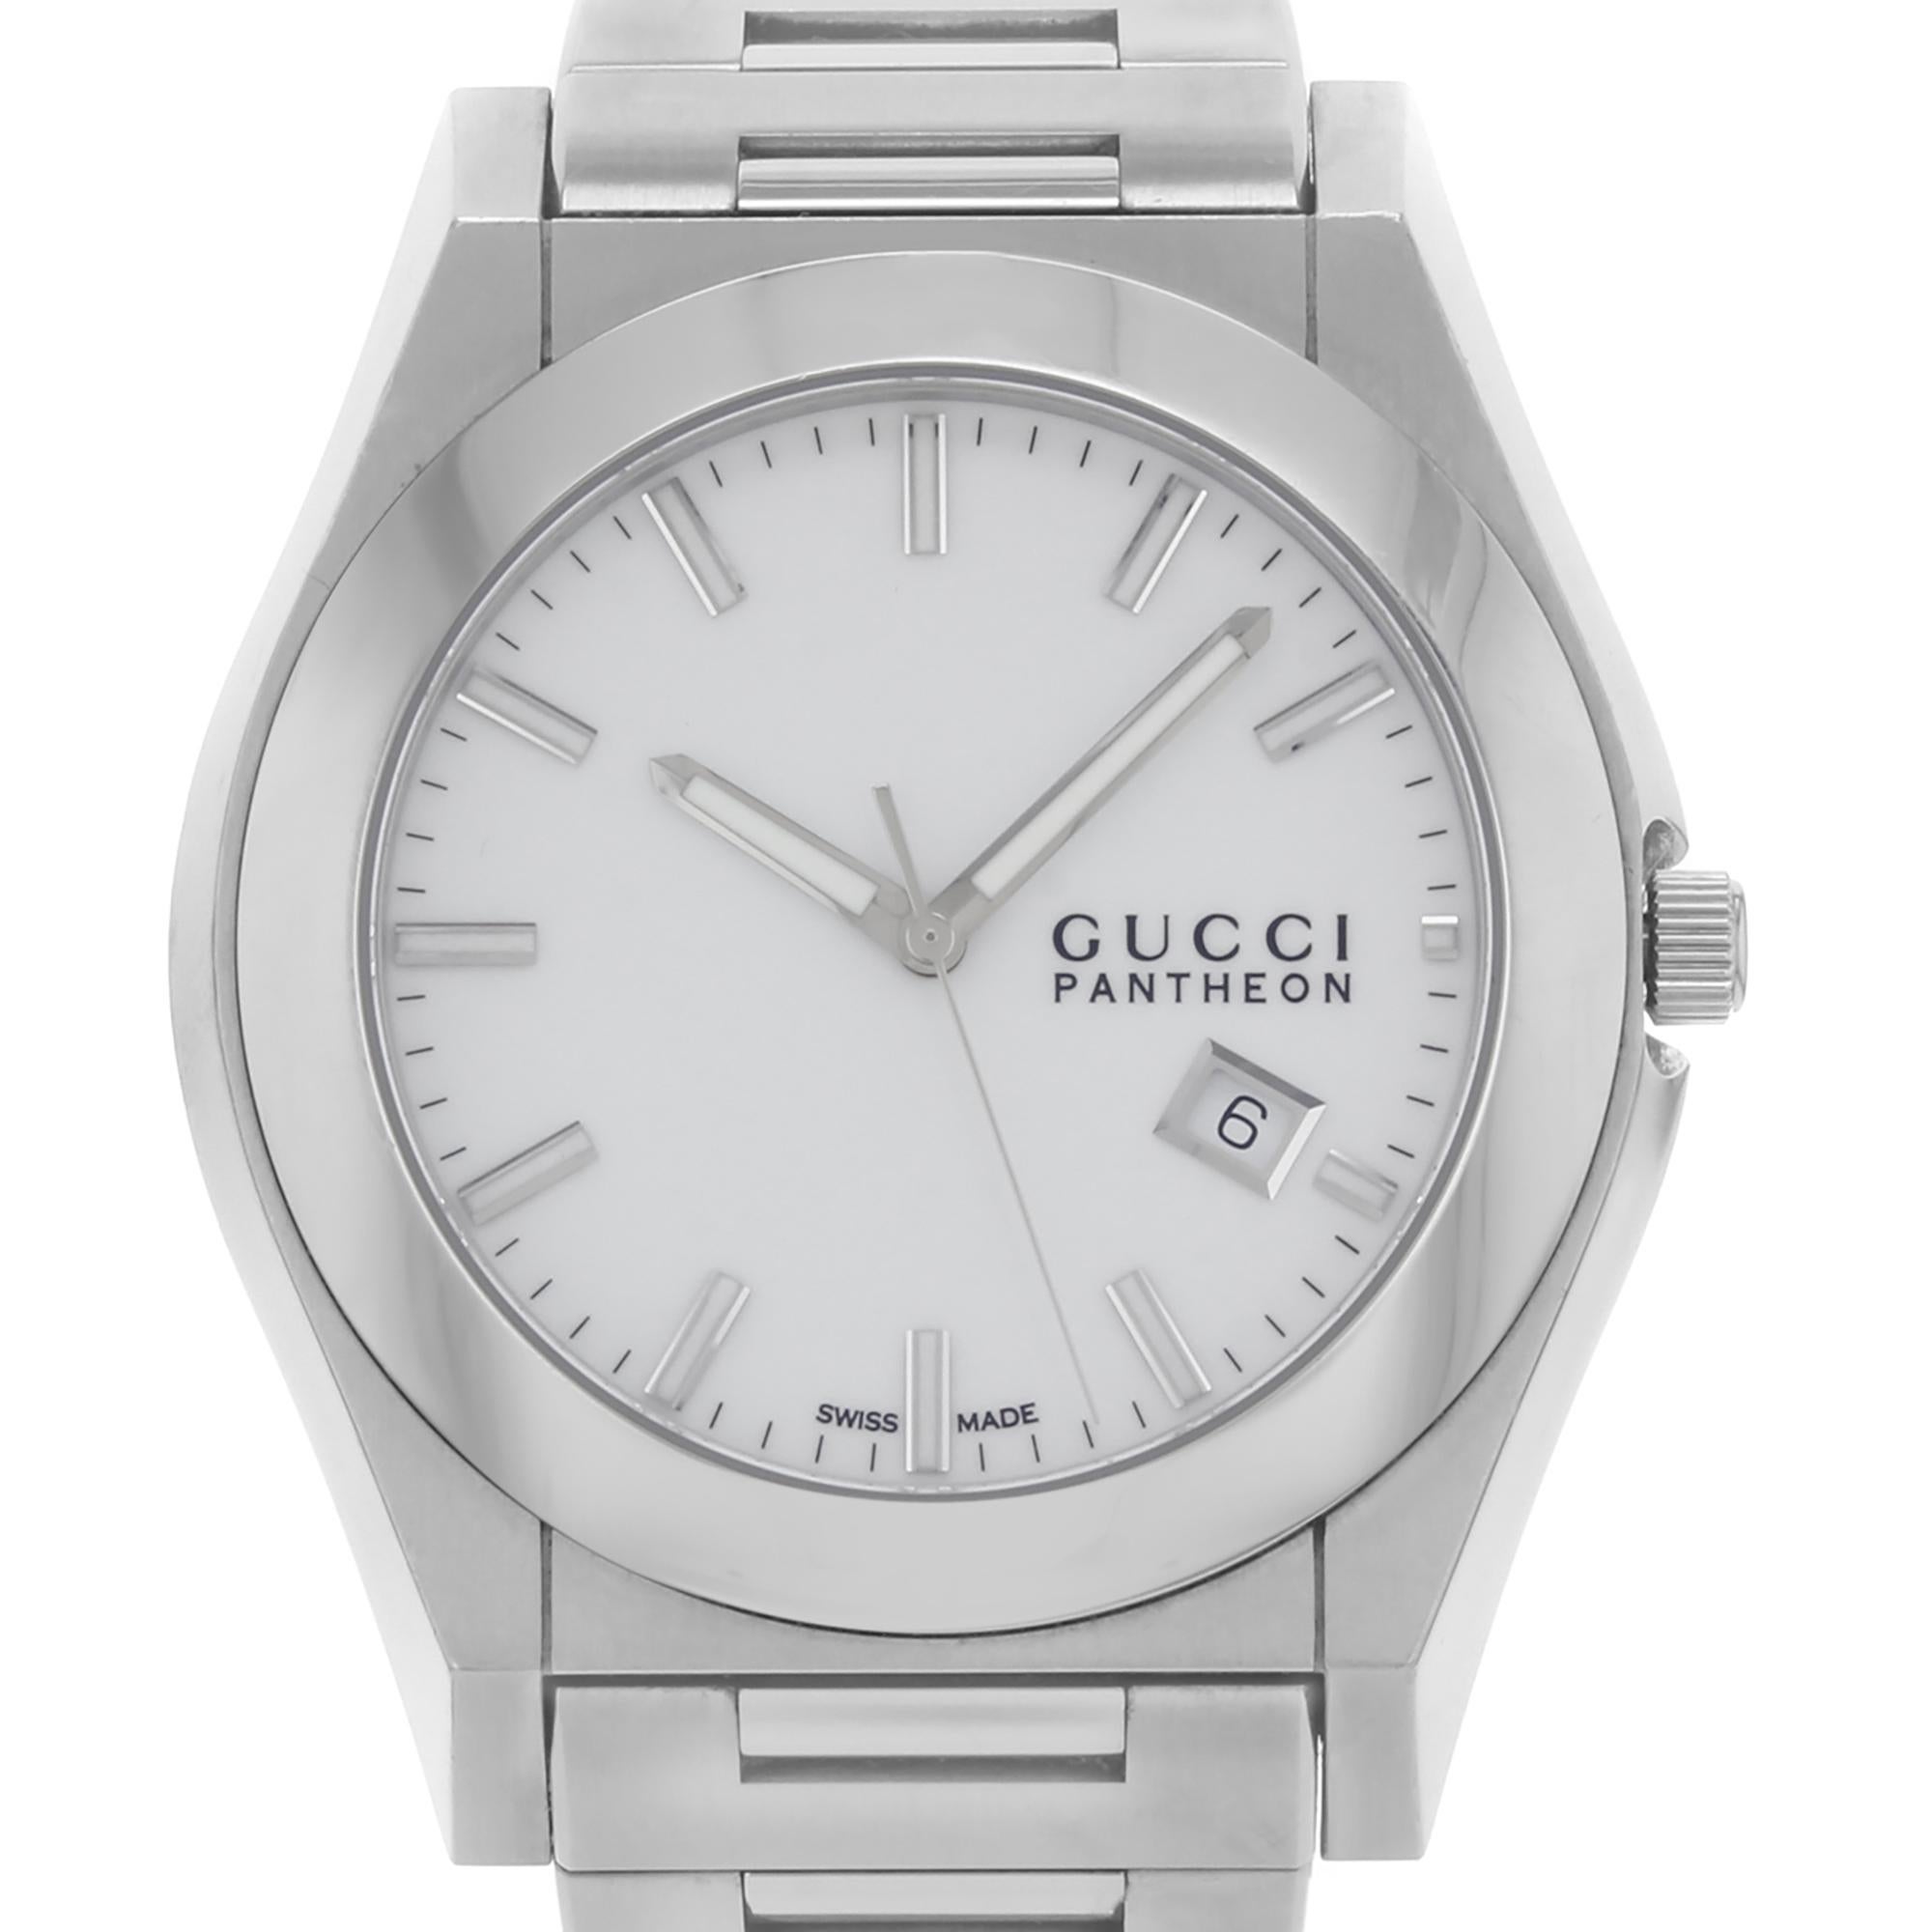 Pre-owned Gucci 115 Pantheon 44mm Stainless Steel White Dial Quartz Mens Watch YA115210. The Watch Might Have Minor Blemishes on the Crystal Coating and the Case. Original Box and Papers are not Included. Comes with a Chronostore Presentation Box